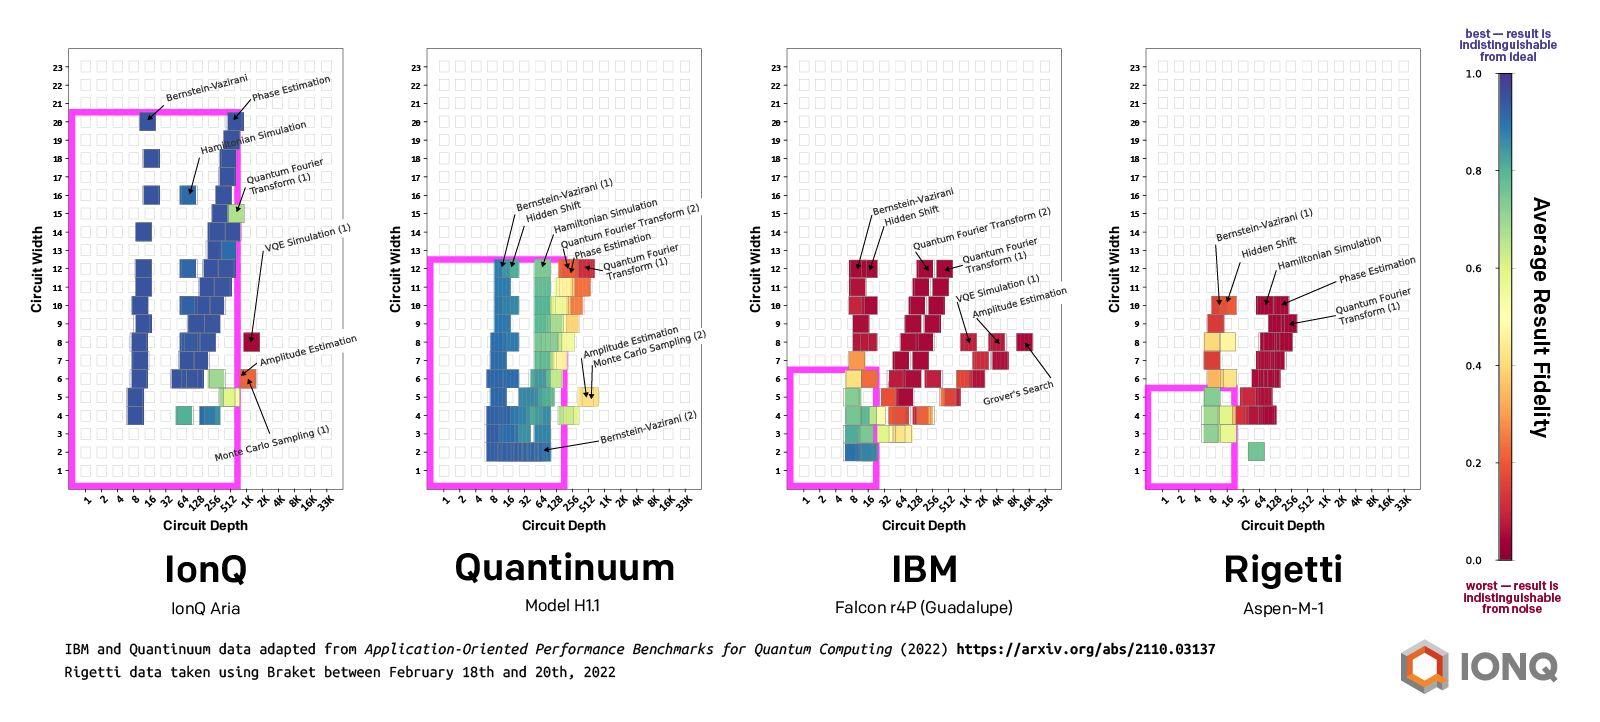 Side-by-side comparison of quantum computers using QED-C benchmarks. The vertical and horizontal axis represents the number of qubits (circuit width) and the number of quantum gates (circuit depth) used in each algorithm provided in the repository, respectively. Each square corresponds to an executed algorithm, and the color indicates the resulting fidelity (polarization fidelity in this case). Pink rectangles indicate the range in which algorithms are likely to succeed. Data for IBM and Quantinuum adapted from Application-Oriented Performance Benchmarks for Quantum Computing, data for Rigetti taken using Braket between Feb 18-20, 2022.